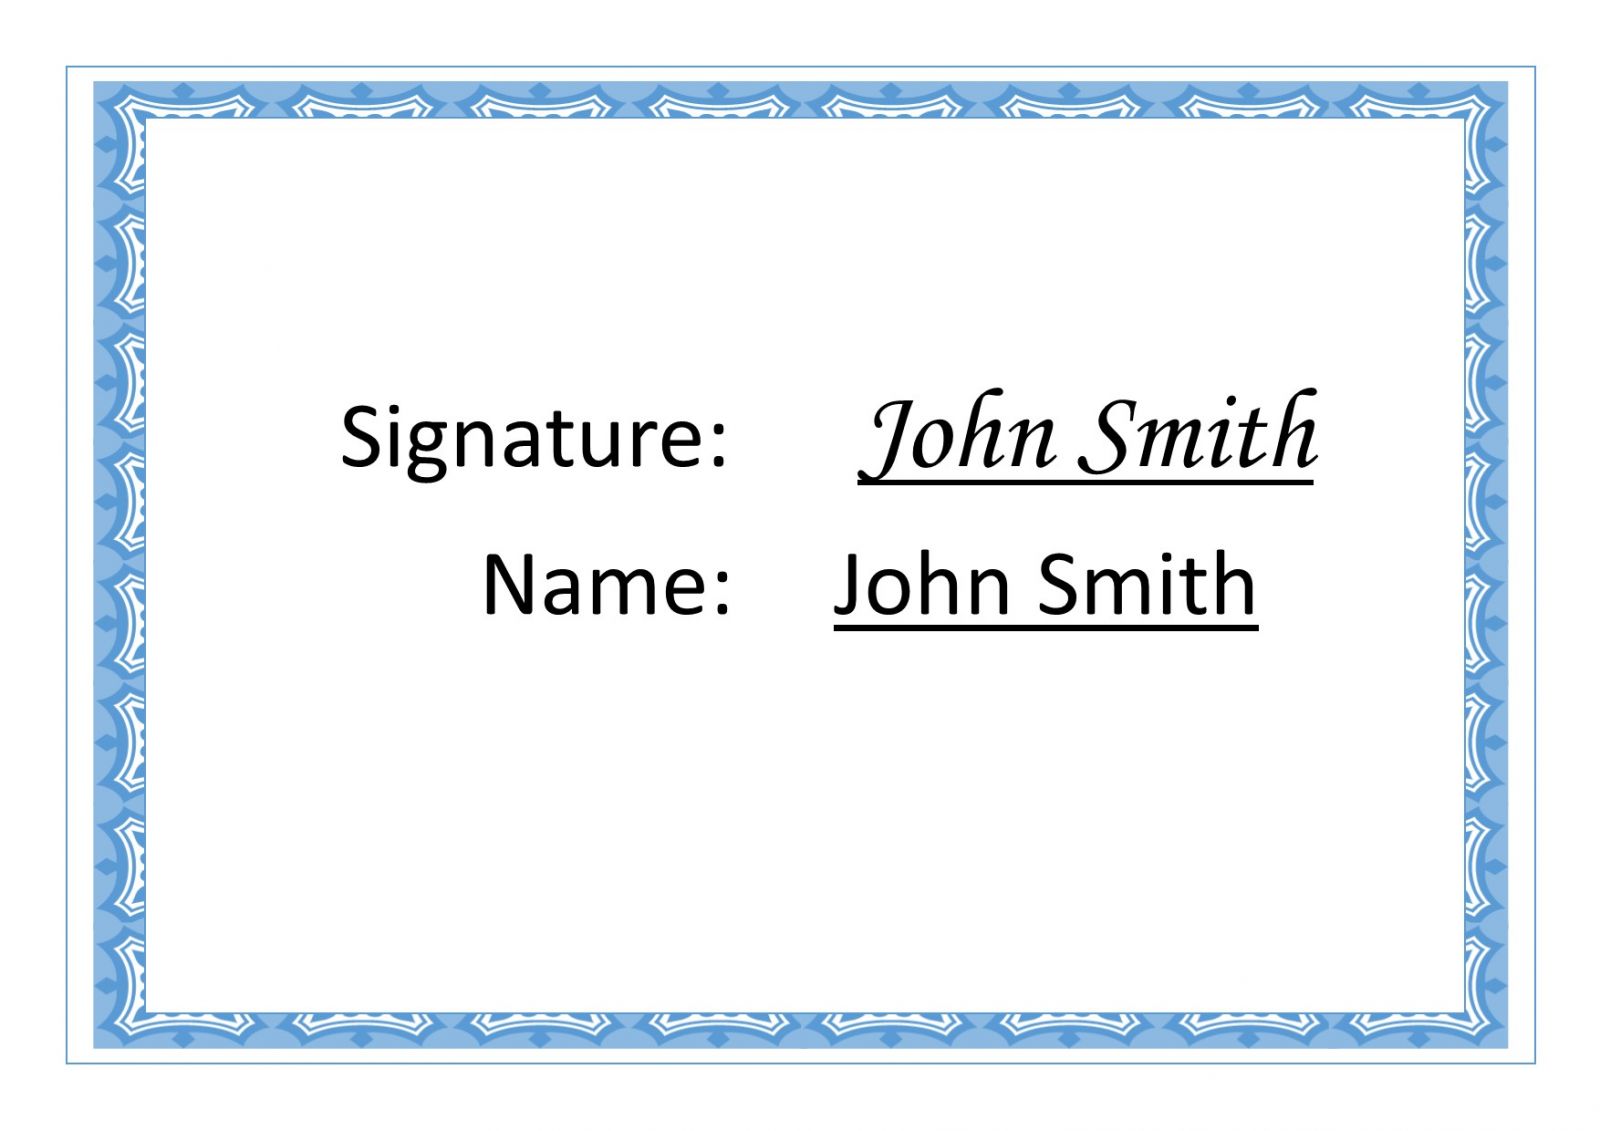 electronic signatures on contracts